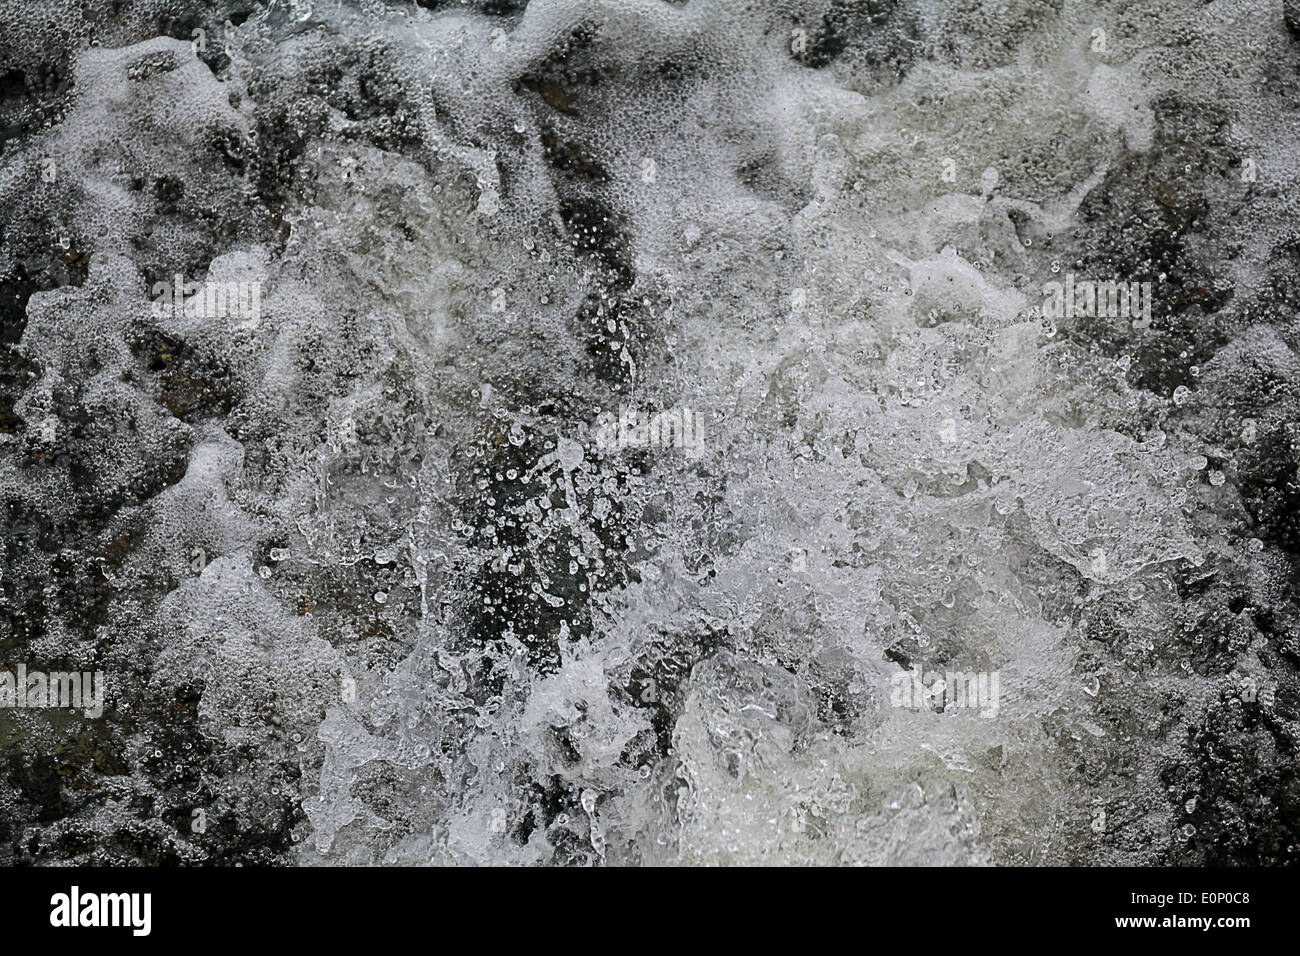 foaming water flowing over rocks, St Ives, Cornwall Stock Photo